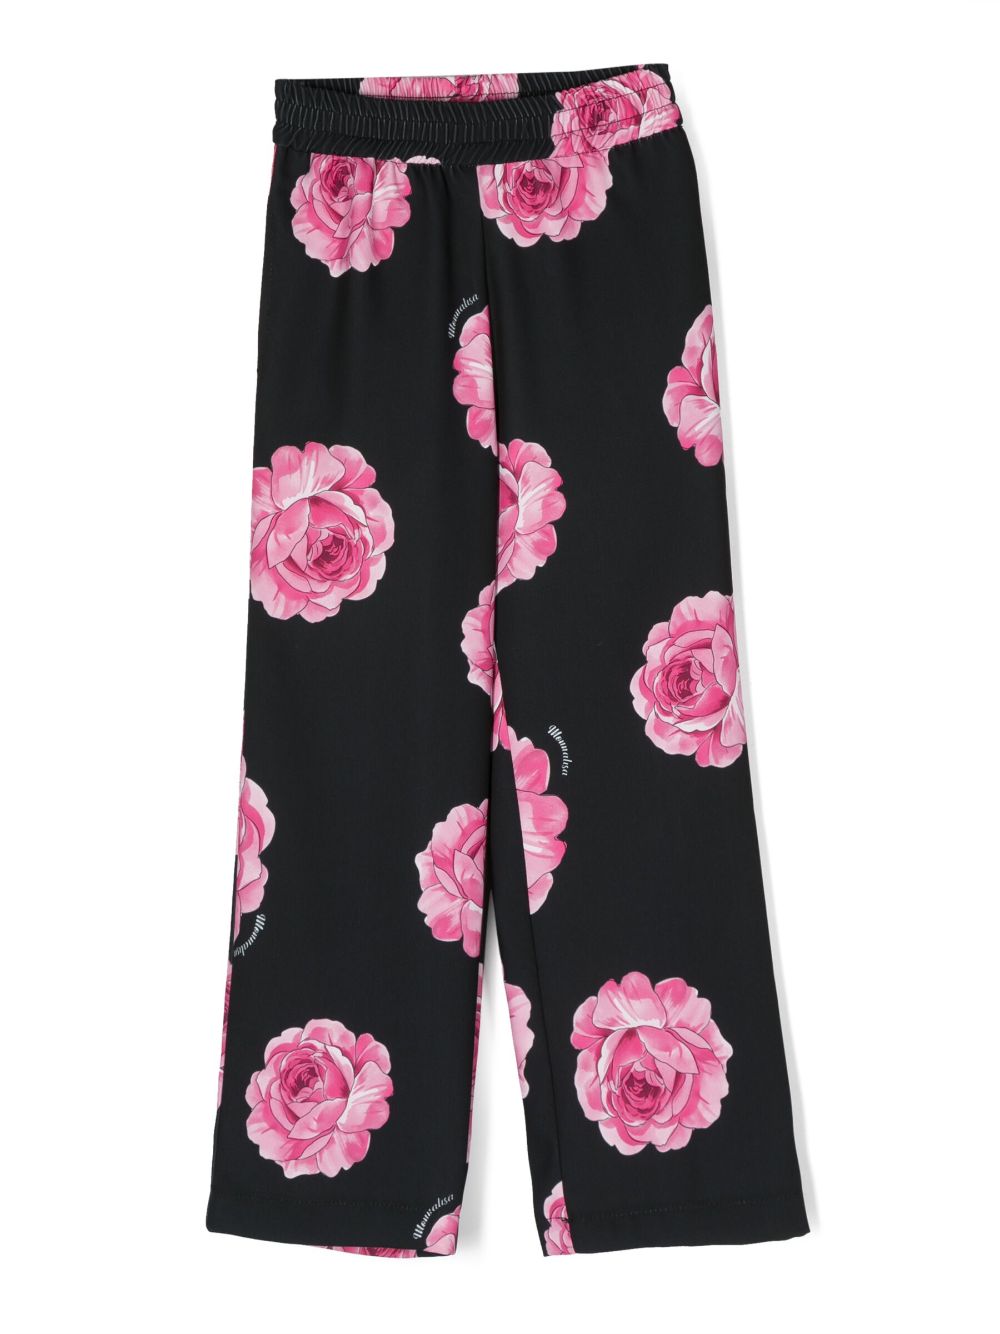 Black trousers for girls with roses